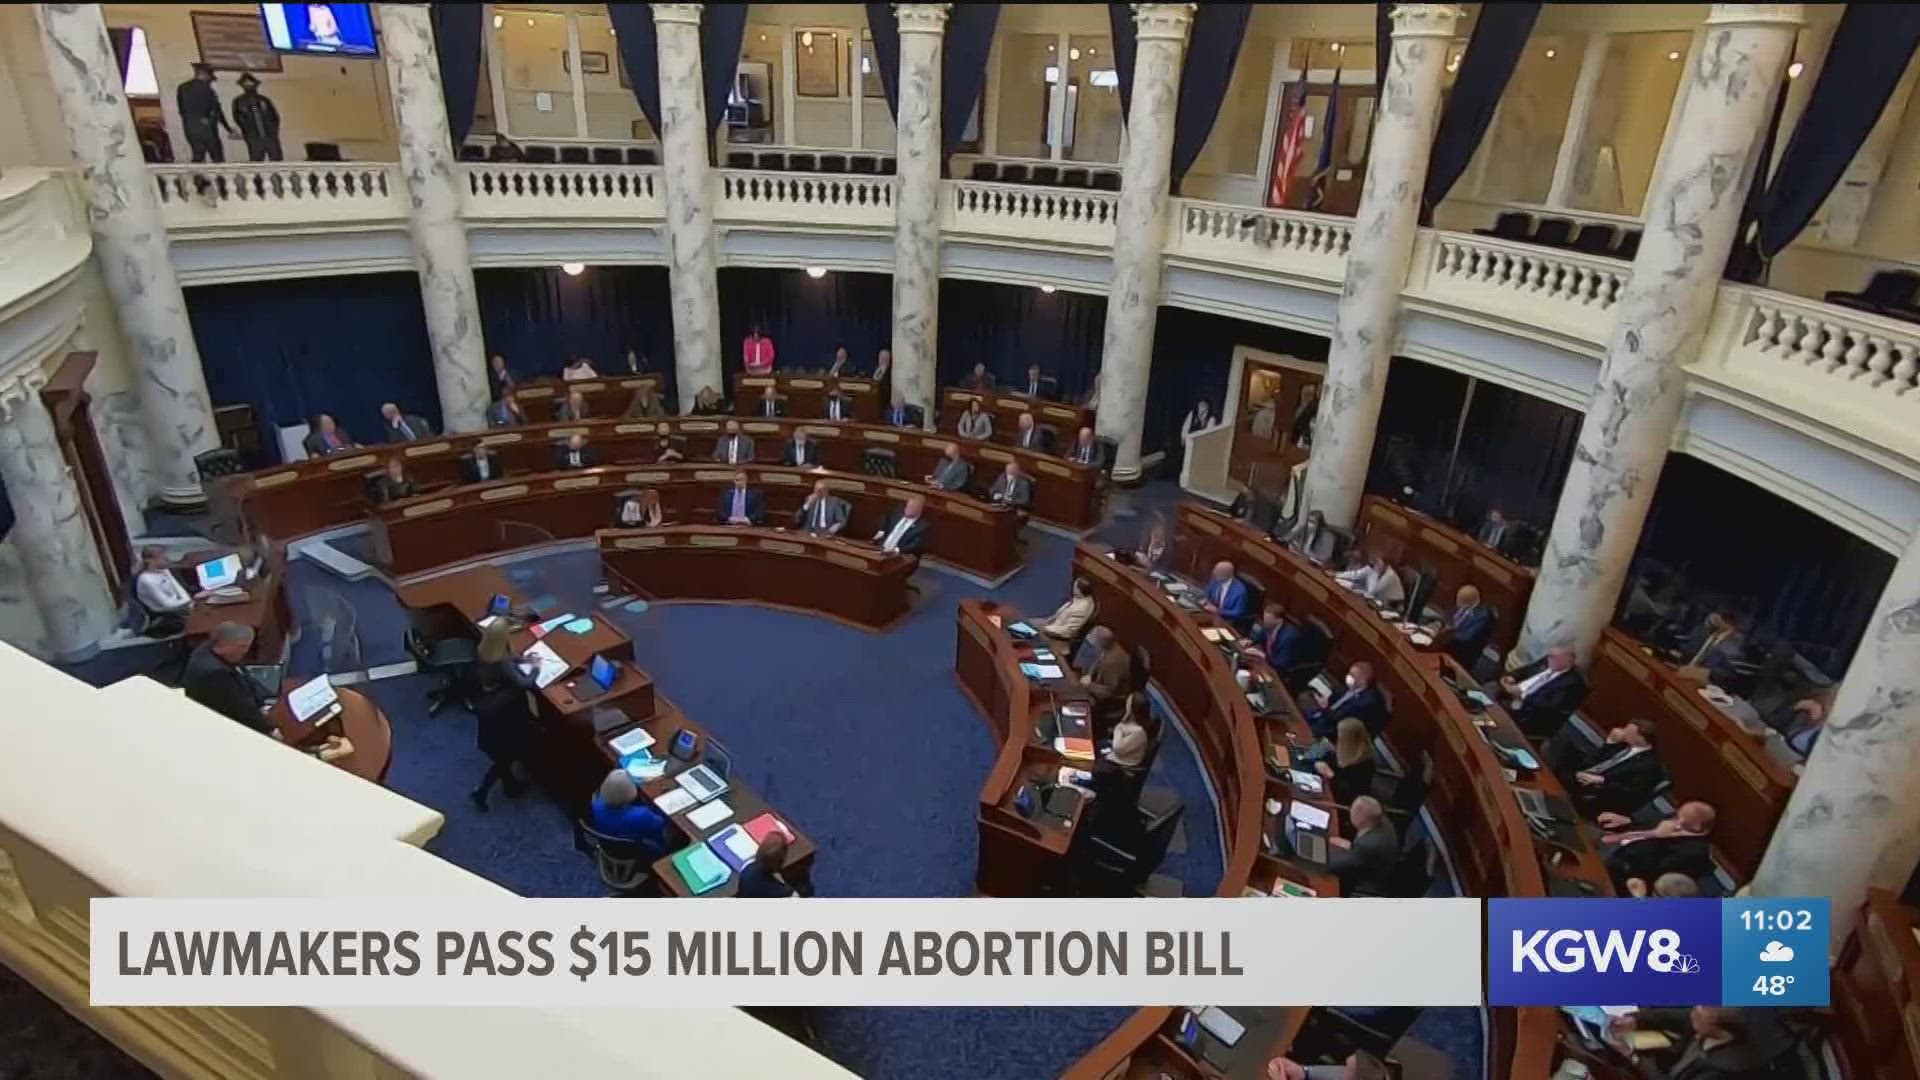 Reproductive health care advocates say Idaho's abortion ban would impact eastern Oregonians who would seek abortions in Boise.